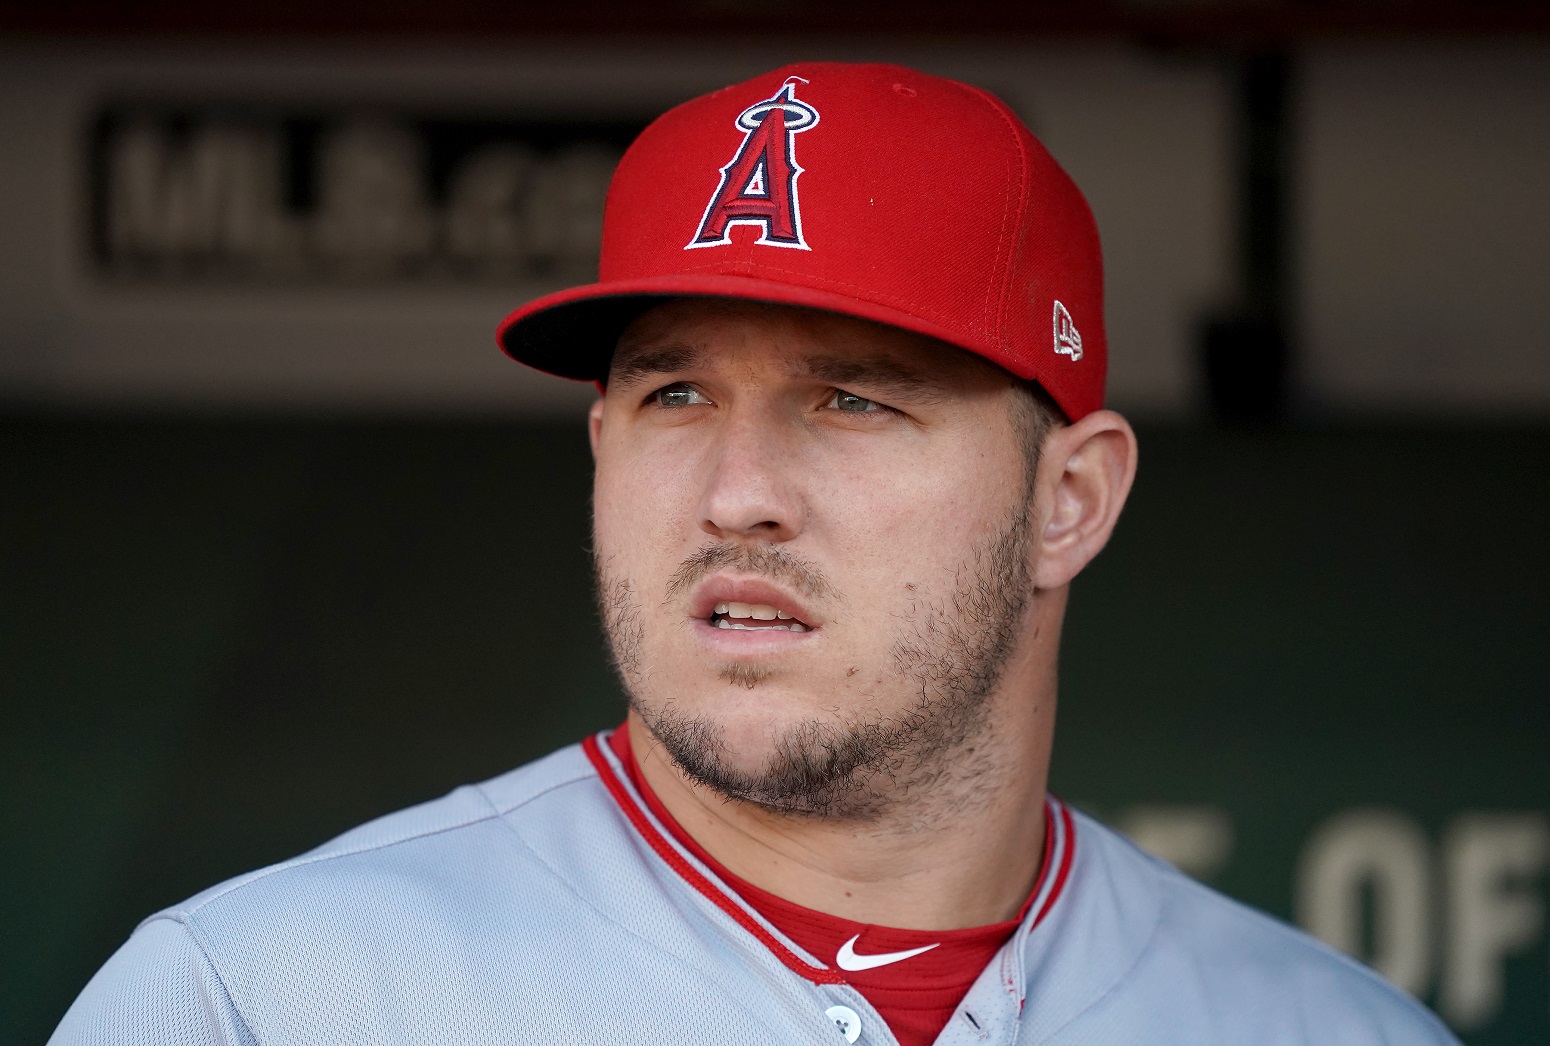 Mike Trout Demands an Urgent Change From the MLB